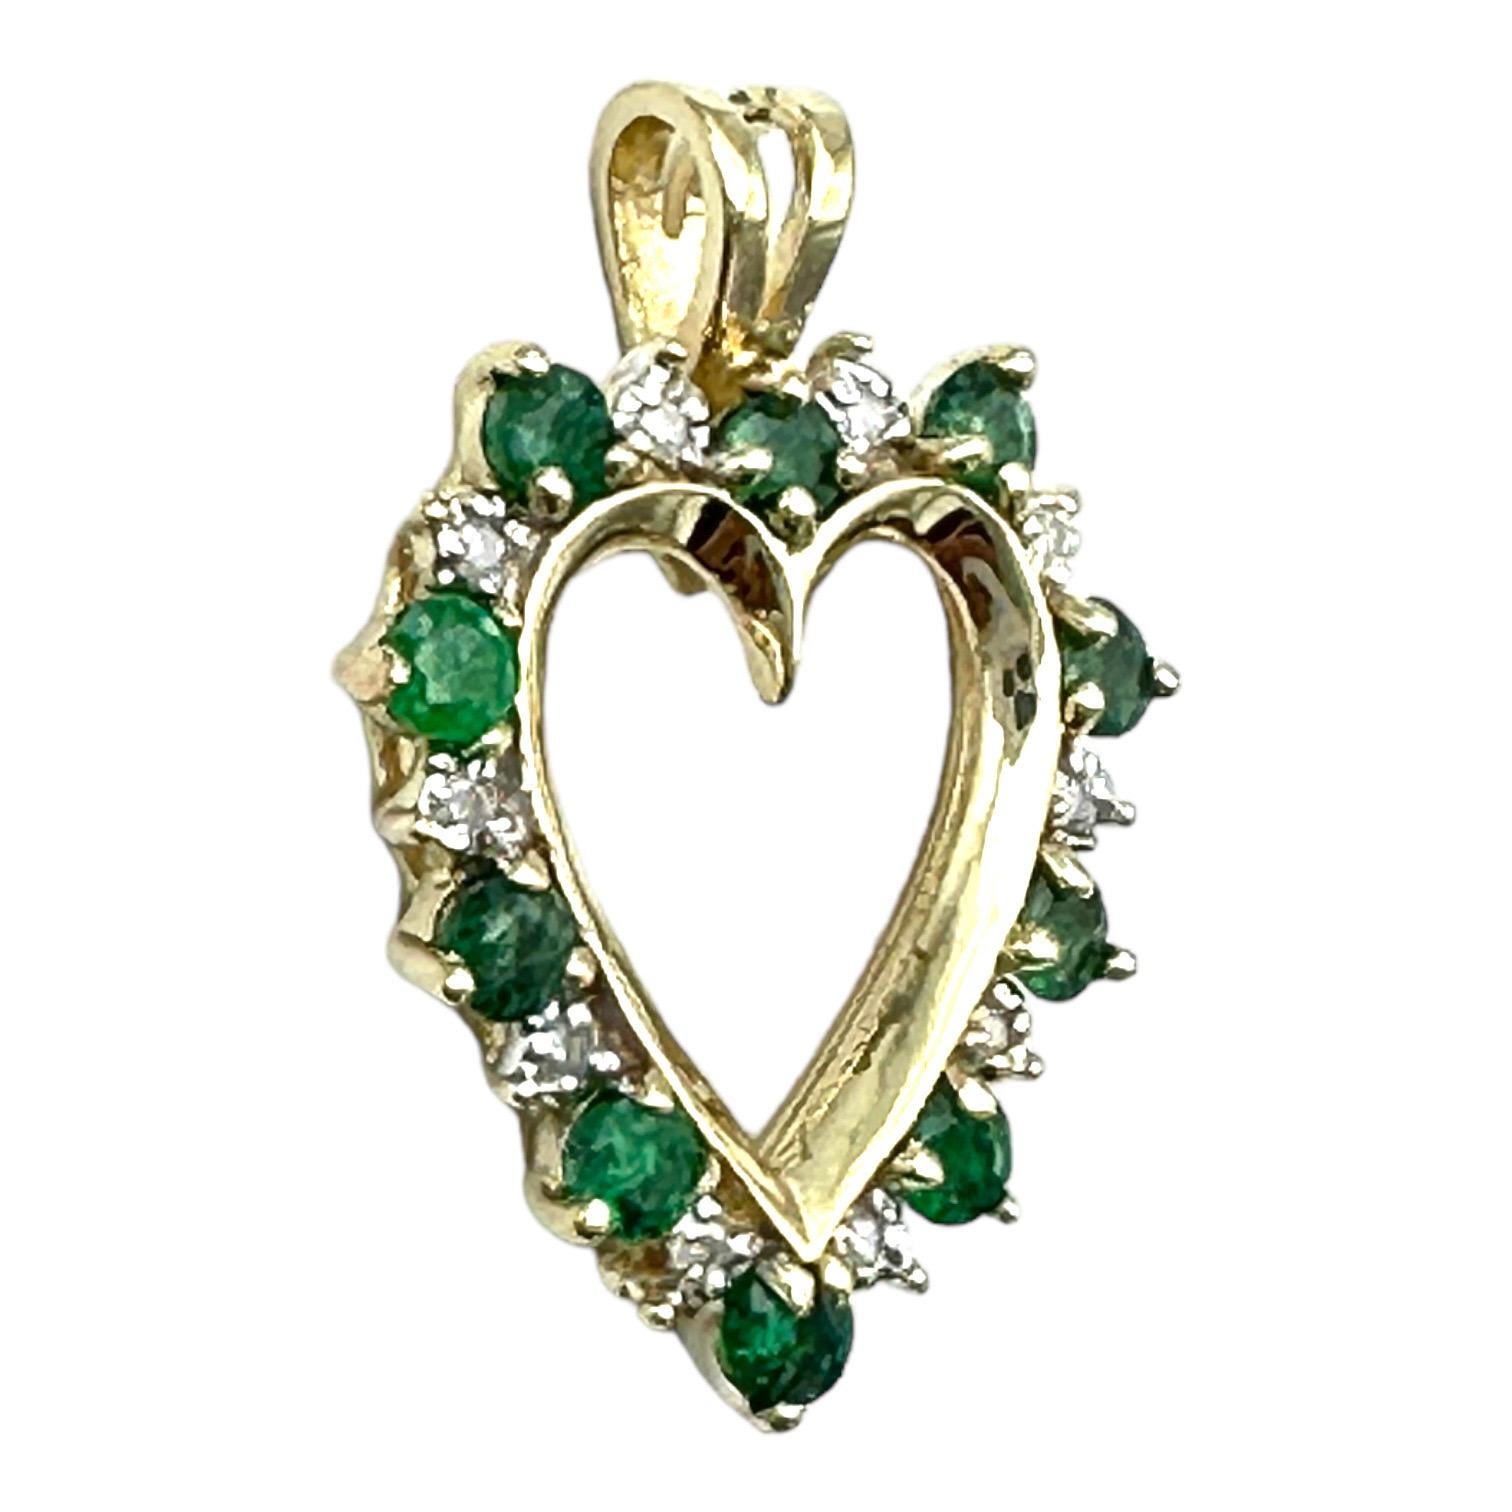 This heart pendant measures 23 x 18 mm and includes the chain bail to accommodate a 4 mm width. The emeralds are a hunter, jewel green alternating by round brilliant diamonds. The pendant's total gemstone weight is 1.20 carat.
This beautiful pendant